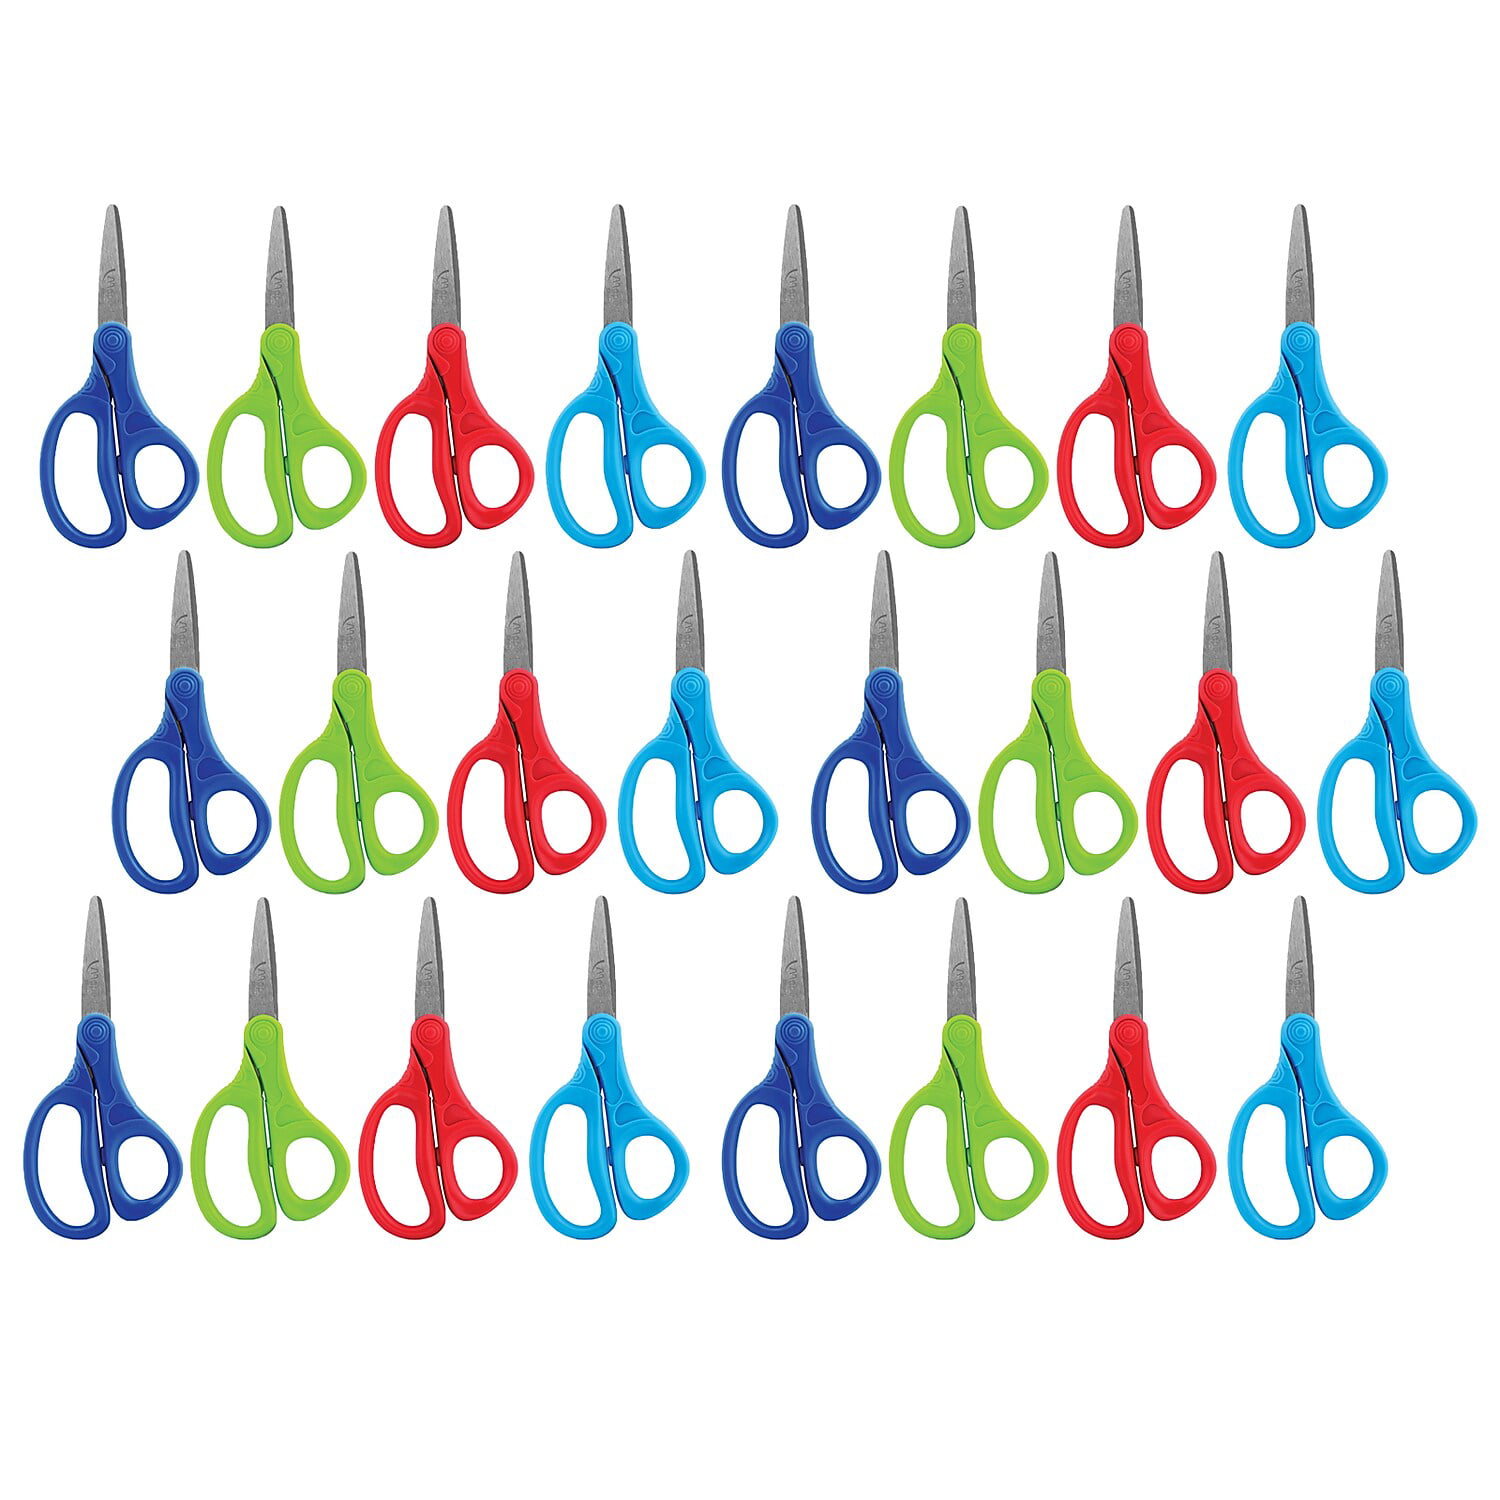 Maped Kids Scissors 5in Pointed